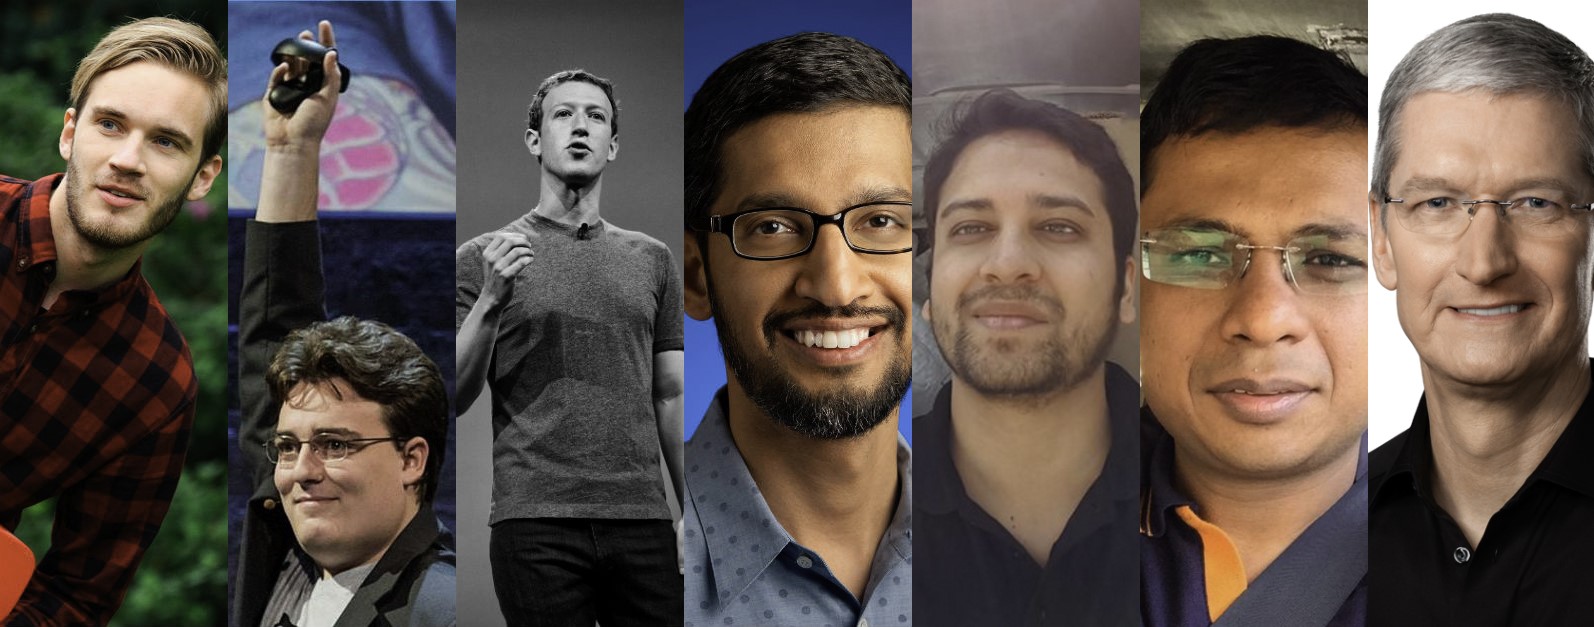 time 100 technology leaders